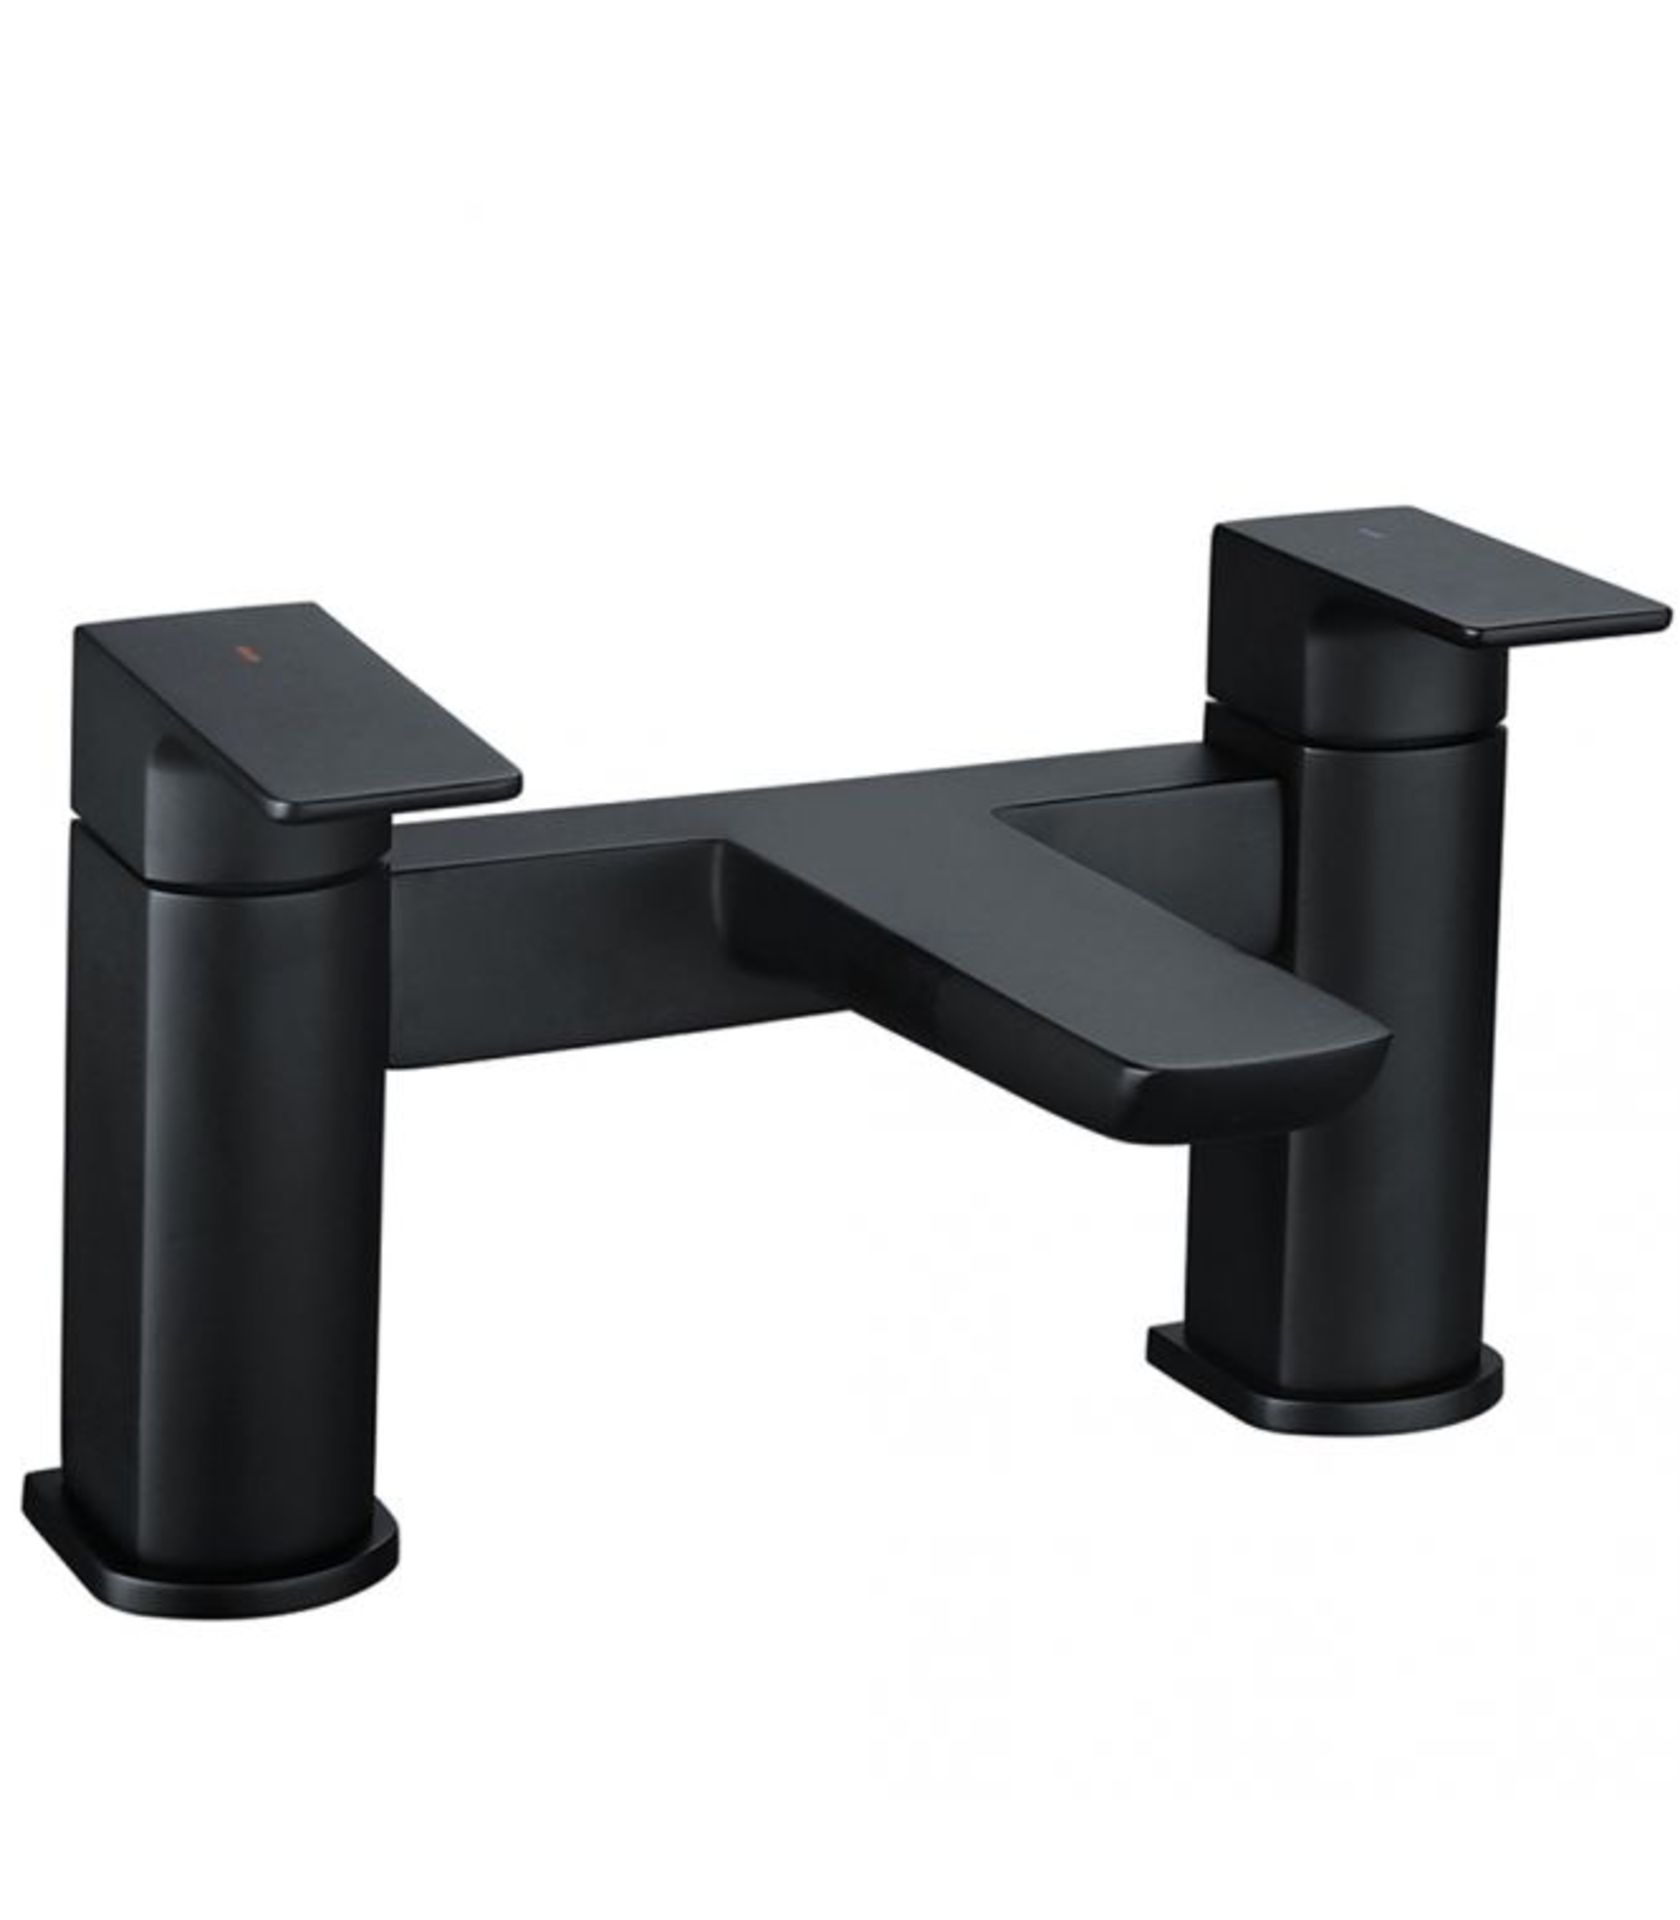 (SUP176) Synergy Studio D Black Bath Filler. RRP £335.00. Clean, straight lines, uncluttered spaces.